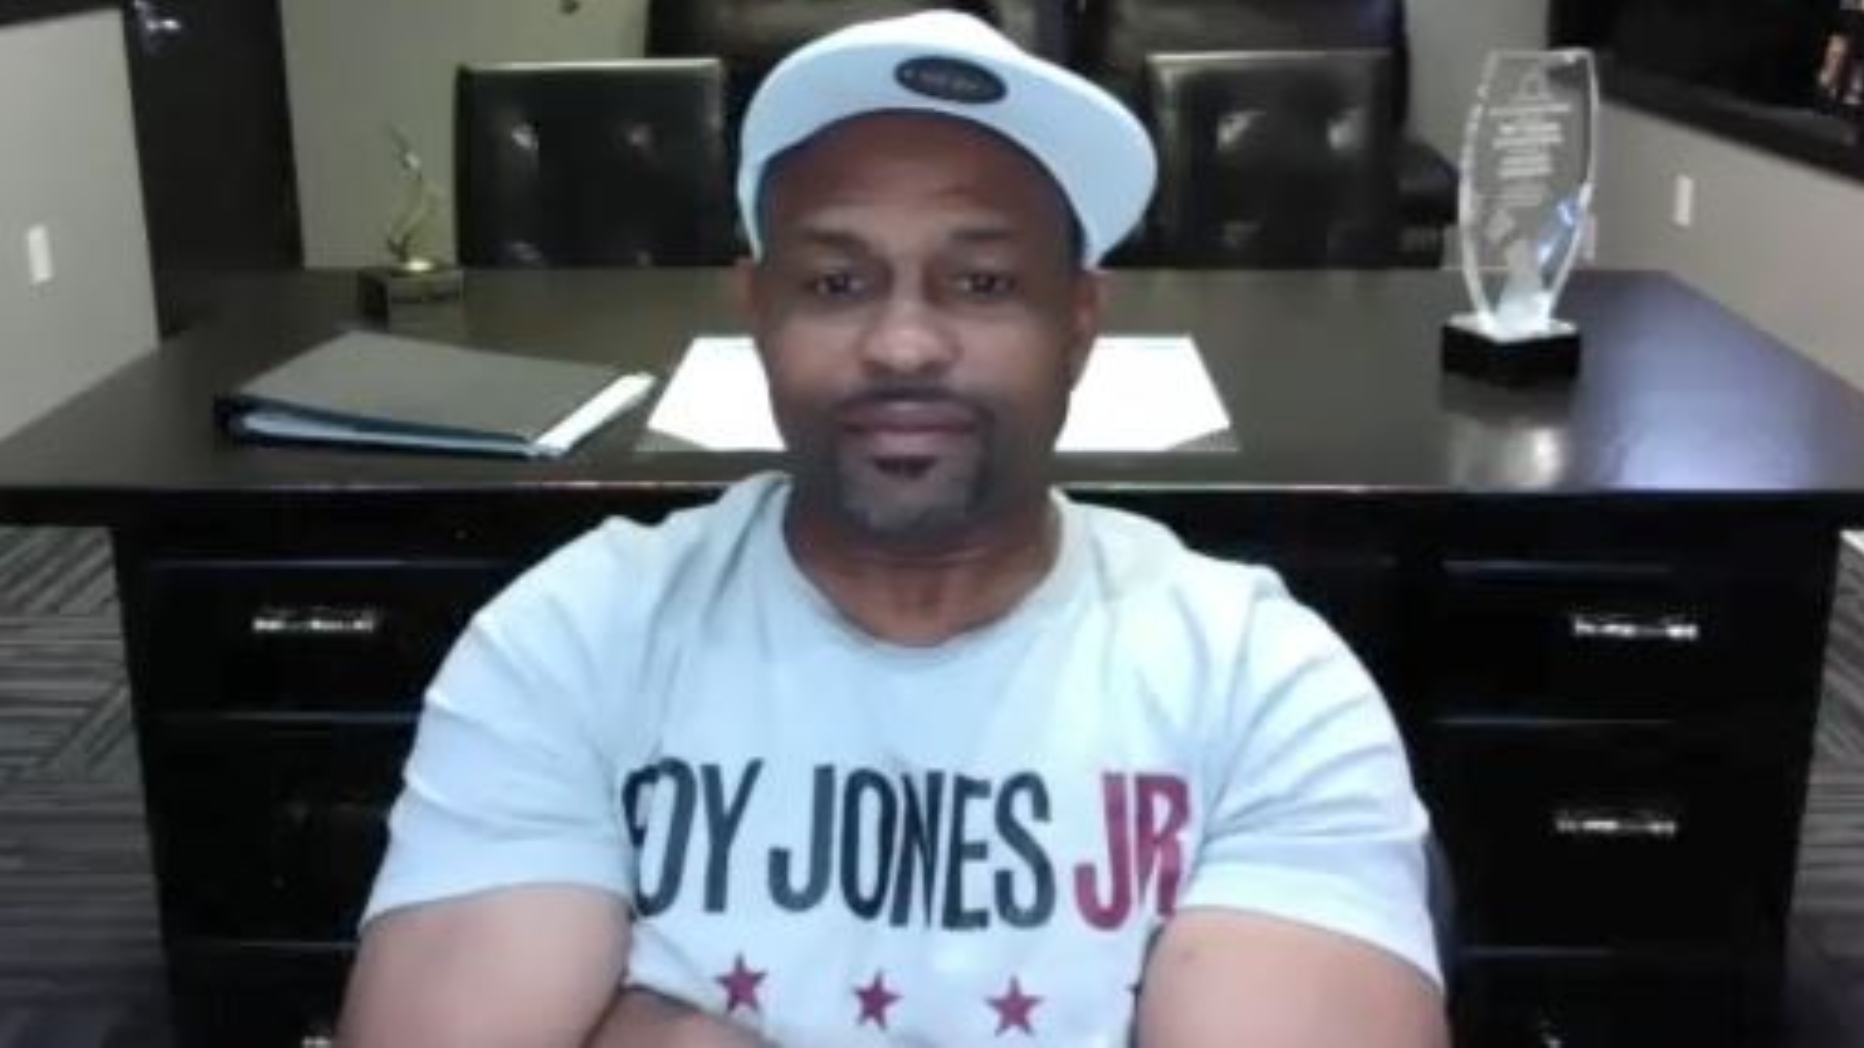 Roy Jones Jr. says no current boxers have the "it" factor